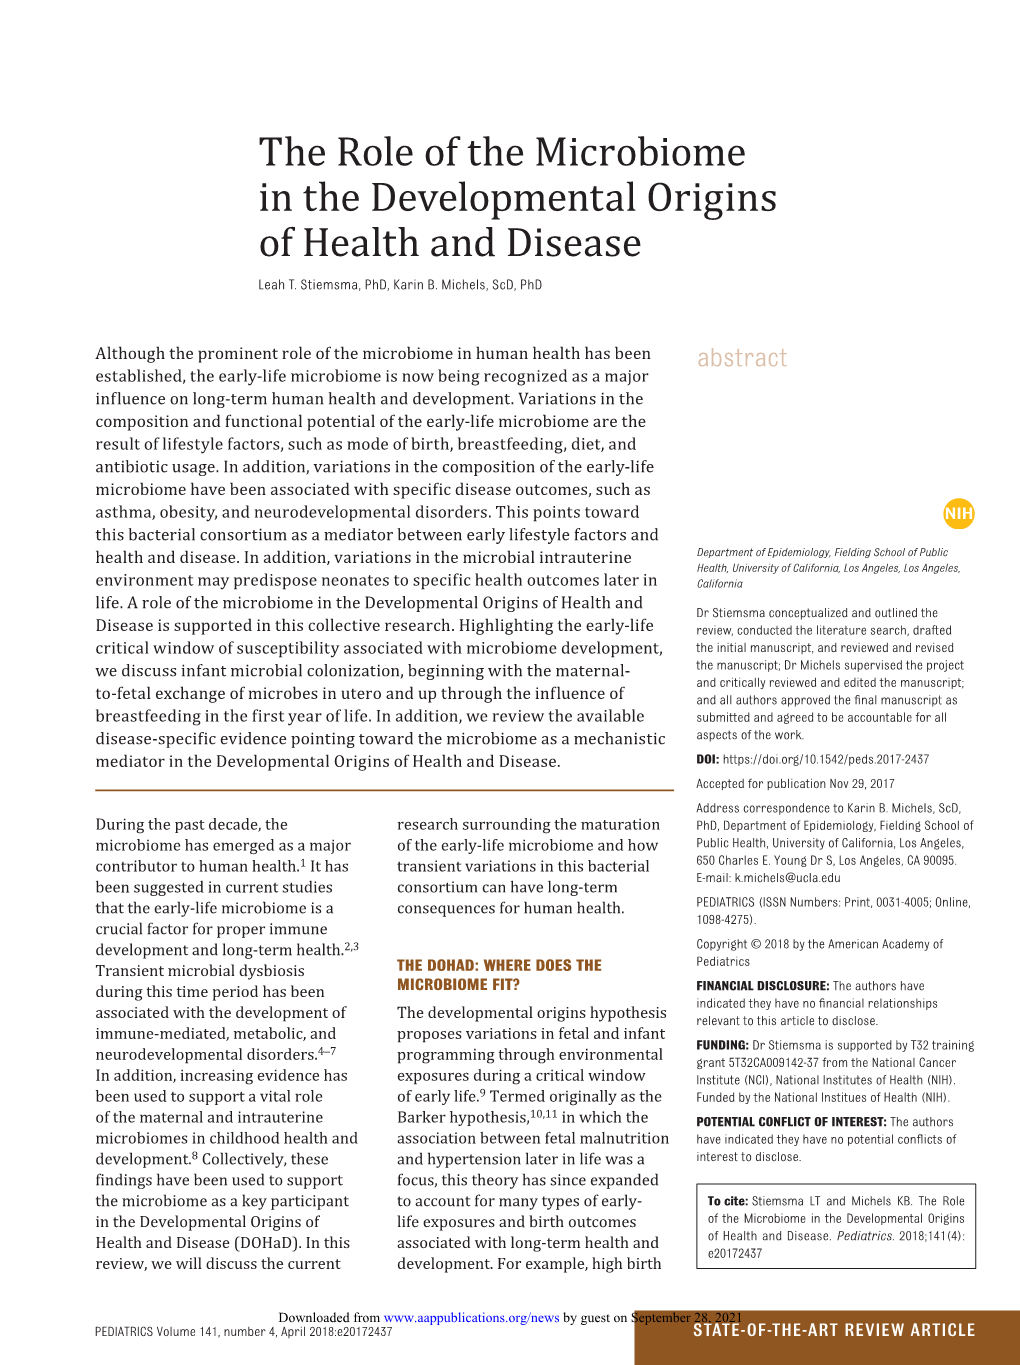 The Role of the Microbiome in the Developmental Origins of Health and Disease Leah T